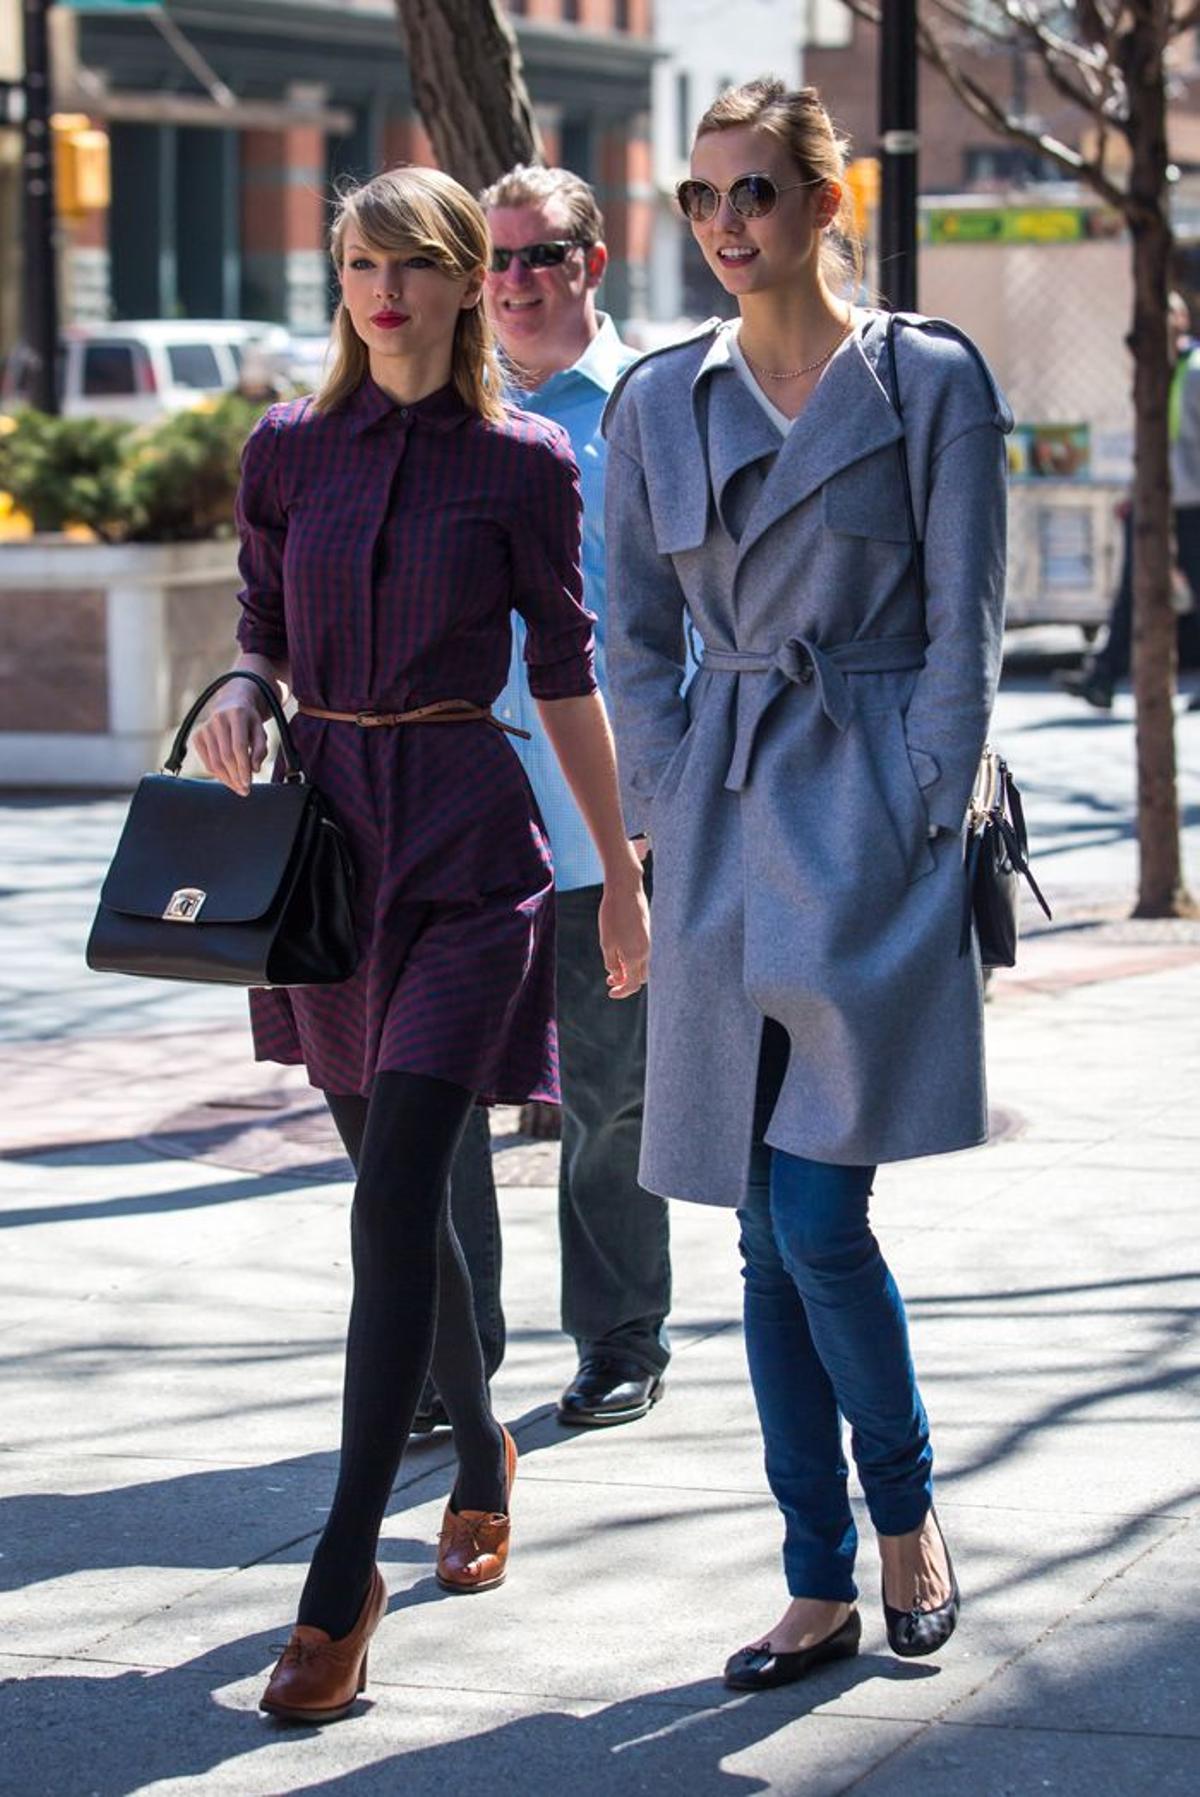 Famosas mejores amigas: Taylor Swift y Karlie Kloss, inseparables